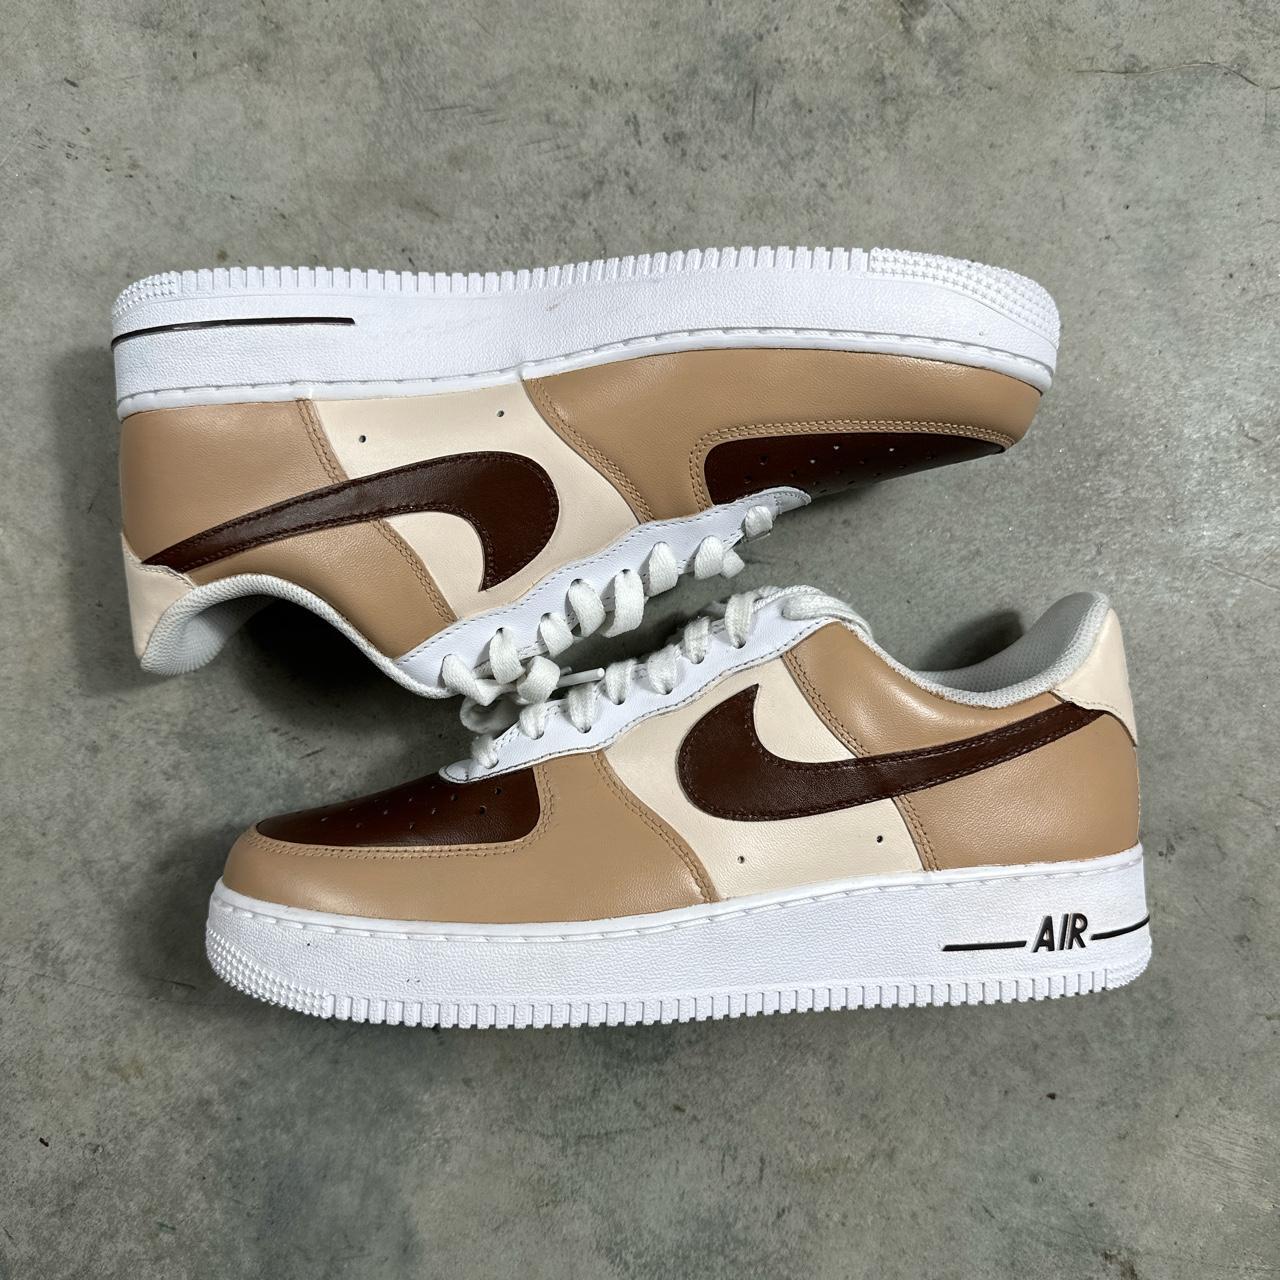 Brown Beige Customized Nike Air Force 1 Can Be Customized 